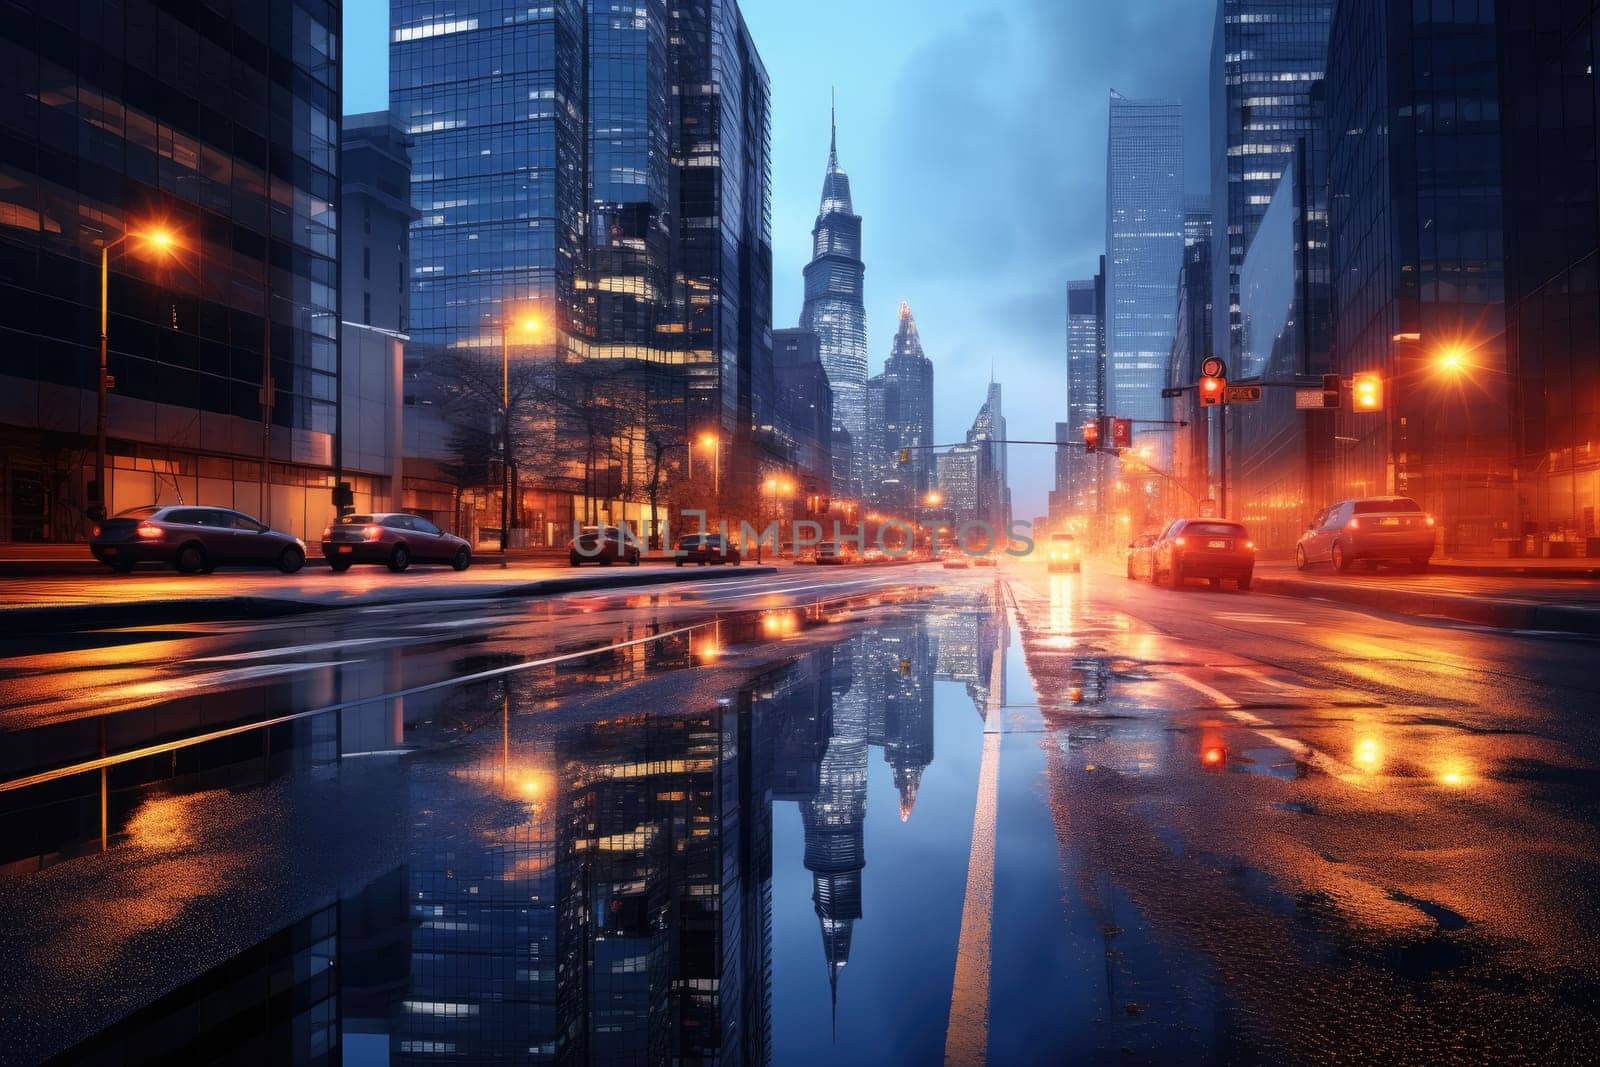 Dusk lights in modern city street scene Blurry image of a near-dark road Bright lights, tall buildings, towers, skyscrapers, roads, cars. by Generative AI.